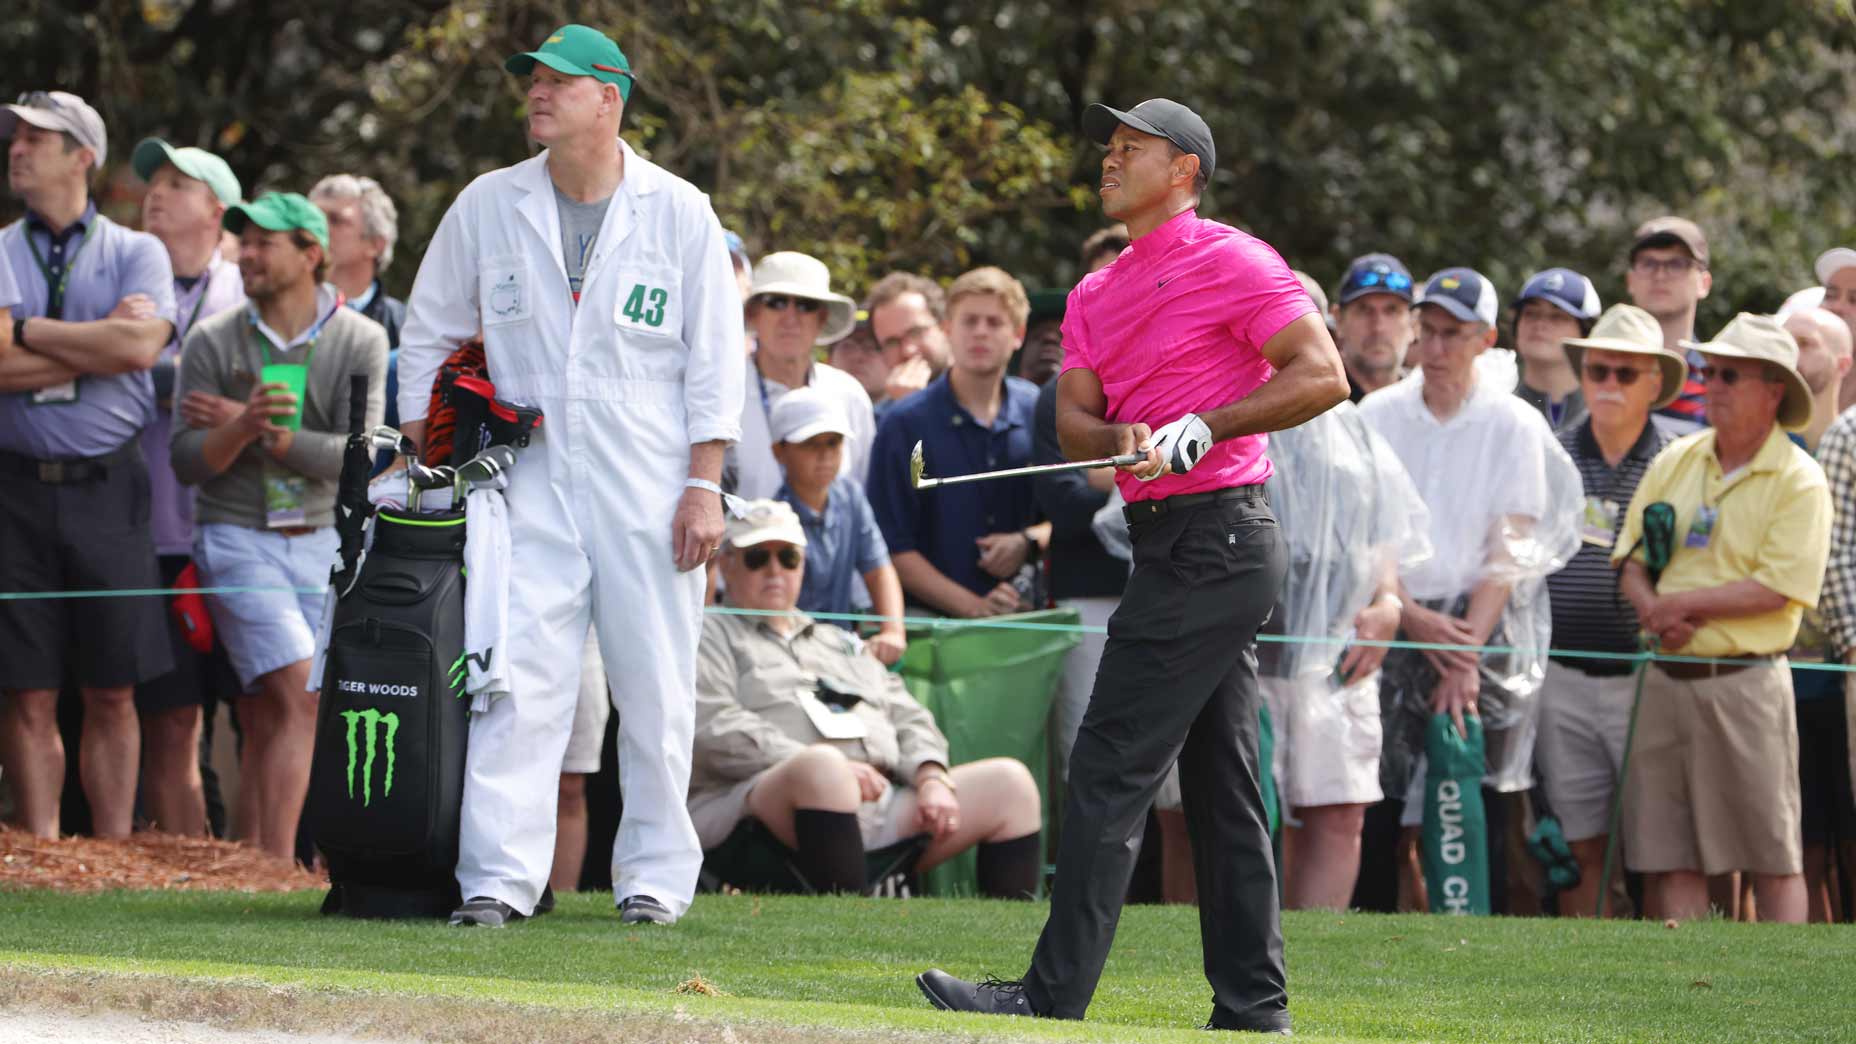 Tiger Woods at the Masters today: Tee time, TV coverage, live